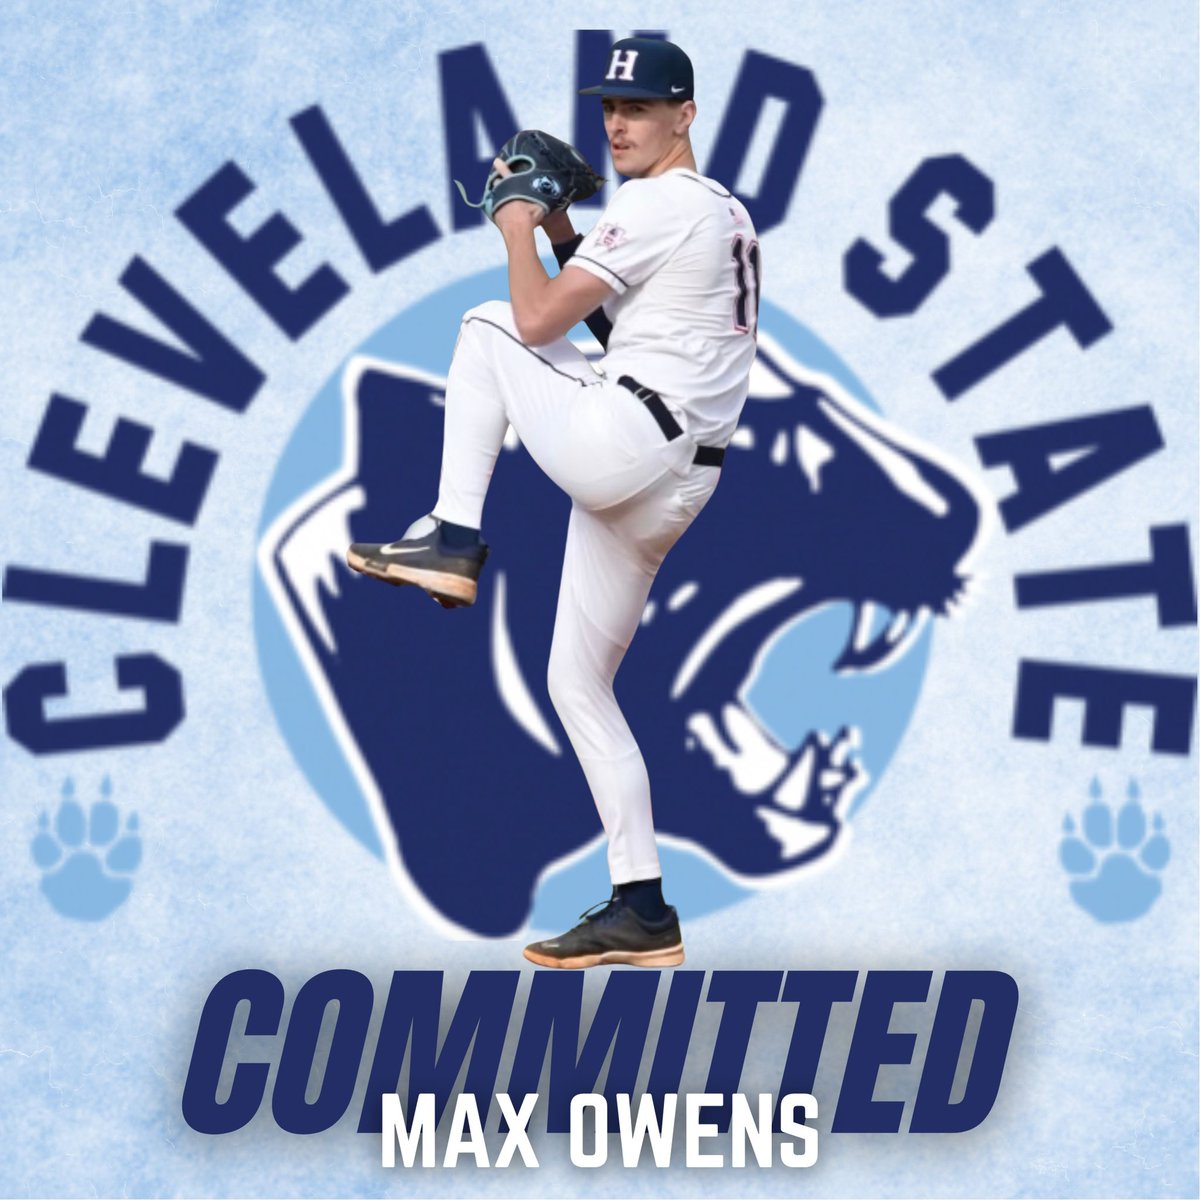 I am excited to announce my commitment to Cleveland State to further my baseball & academic career. I want to thank God for this opportunity, along with my family, coaches, and teammates that have helped me along the way. Go, Cougars! @CSCC_BSB @Generals_BB @teamrawlings10